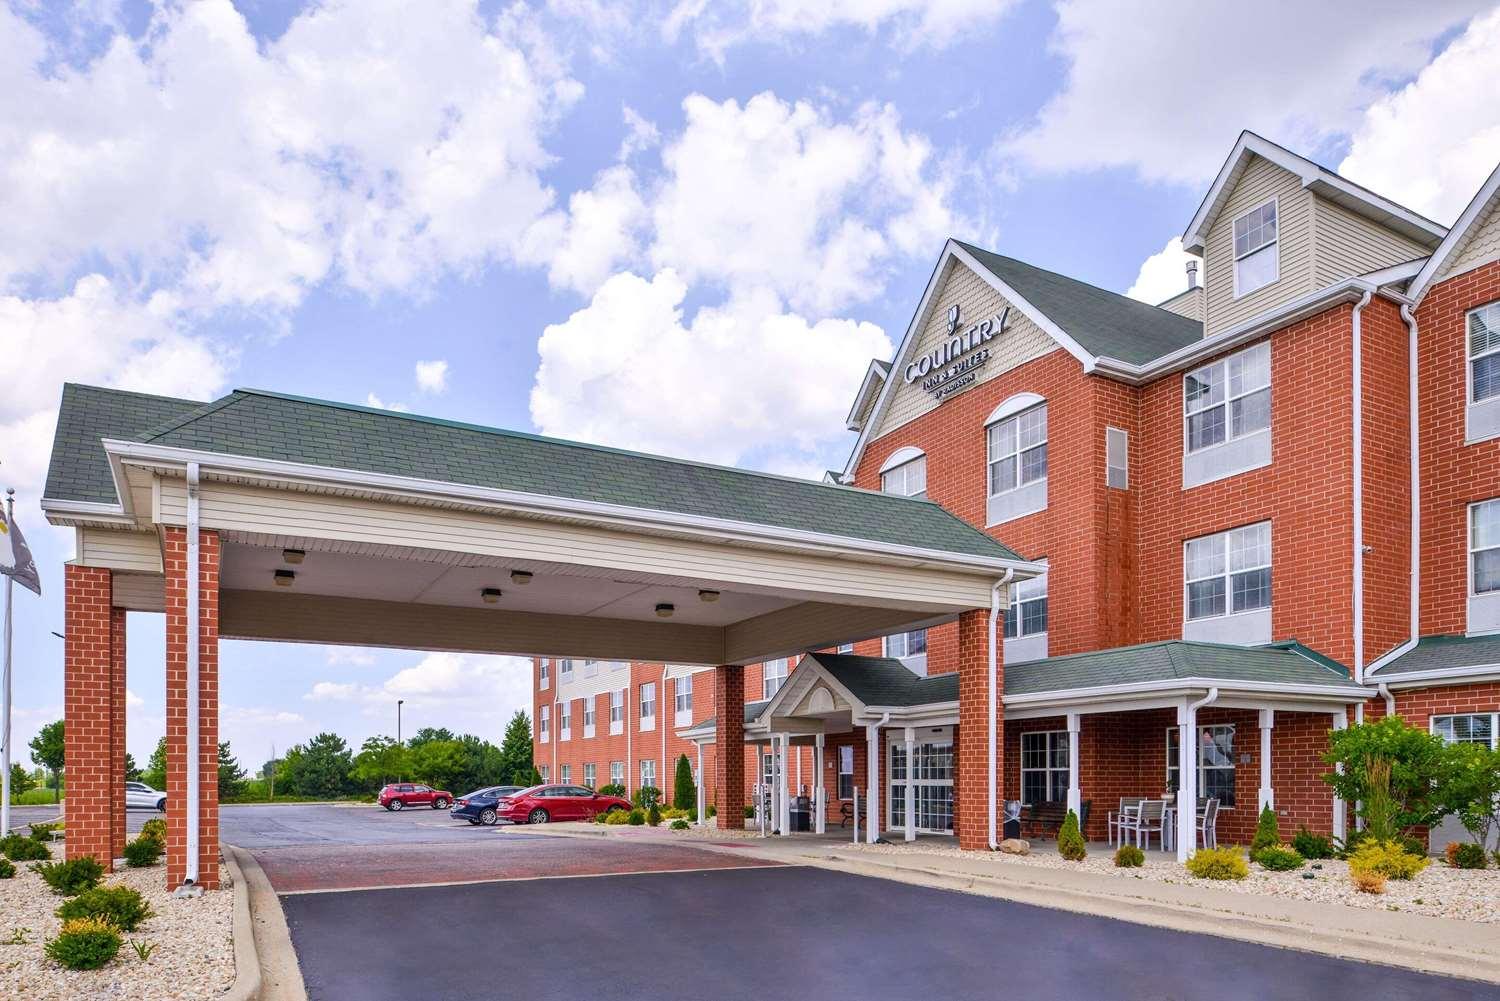 Country Inn & Suites Tinley Park in Tinley Park, IL